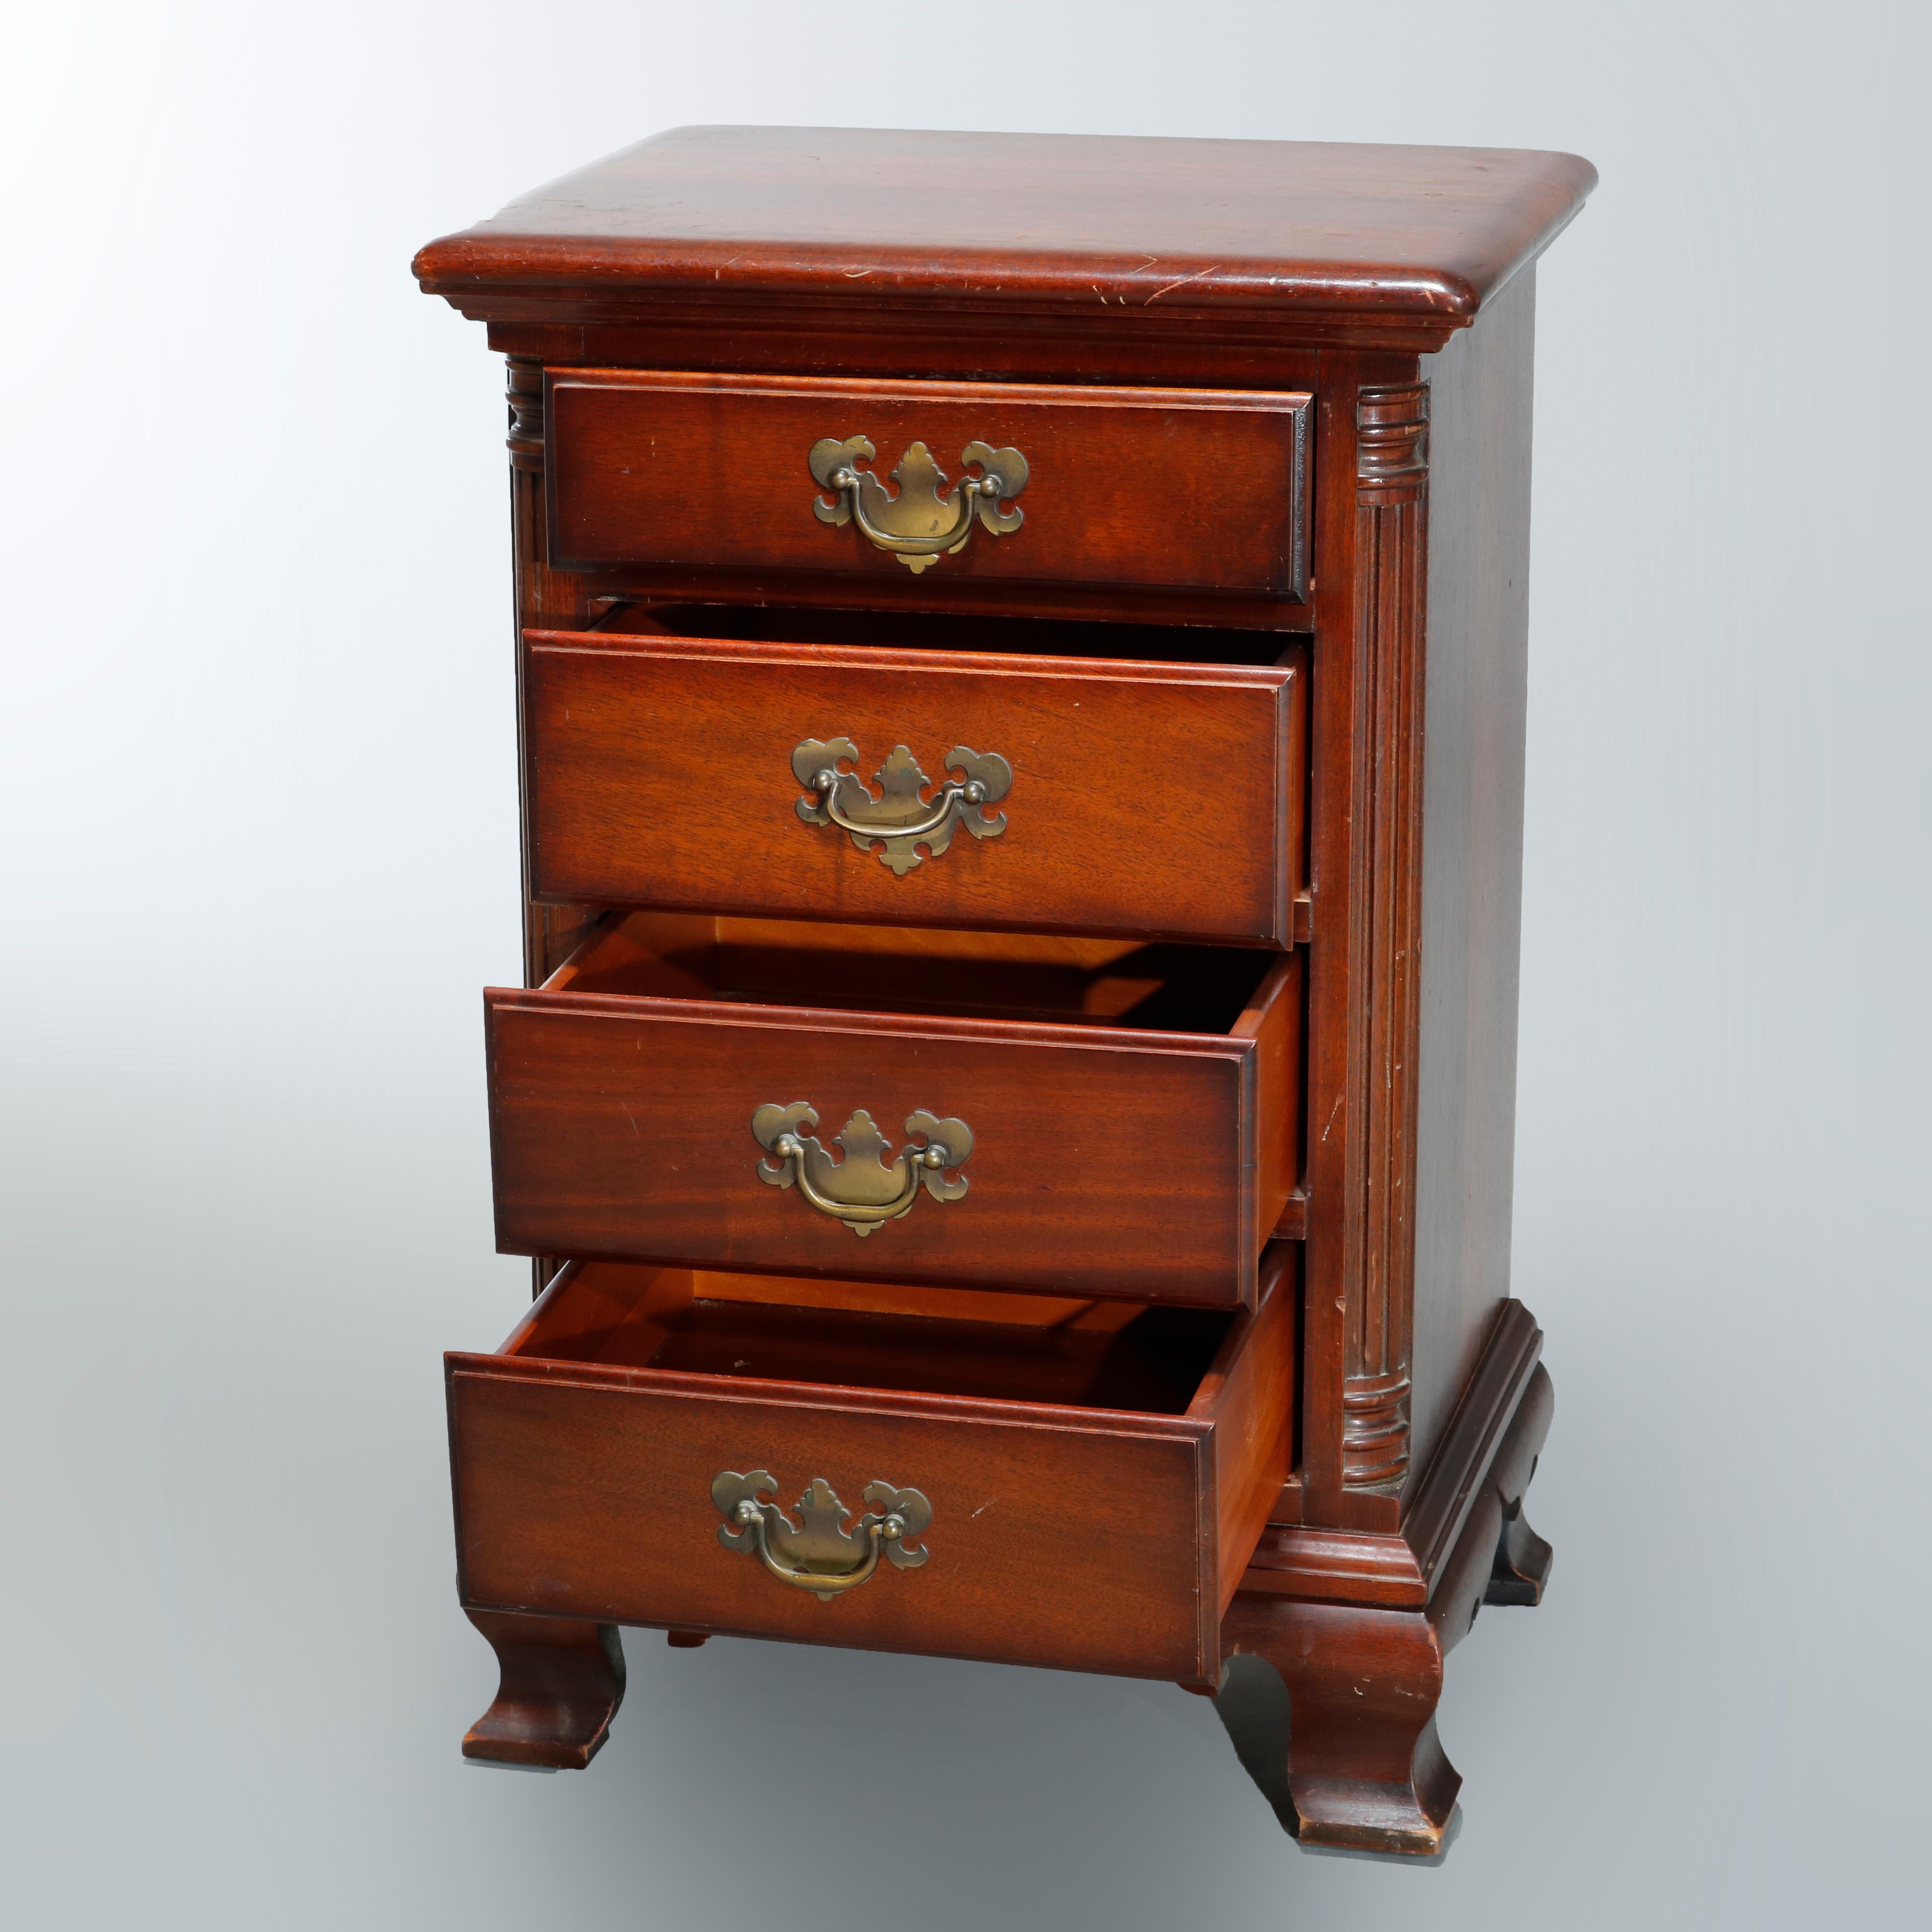 An antique Chippendale style side stand offers mahogany construction with four drawers flanked by quarter columns, brass pulls and raised on ogee bracket feet, original label as photographed, c1930

Measures: 27.75